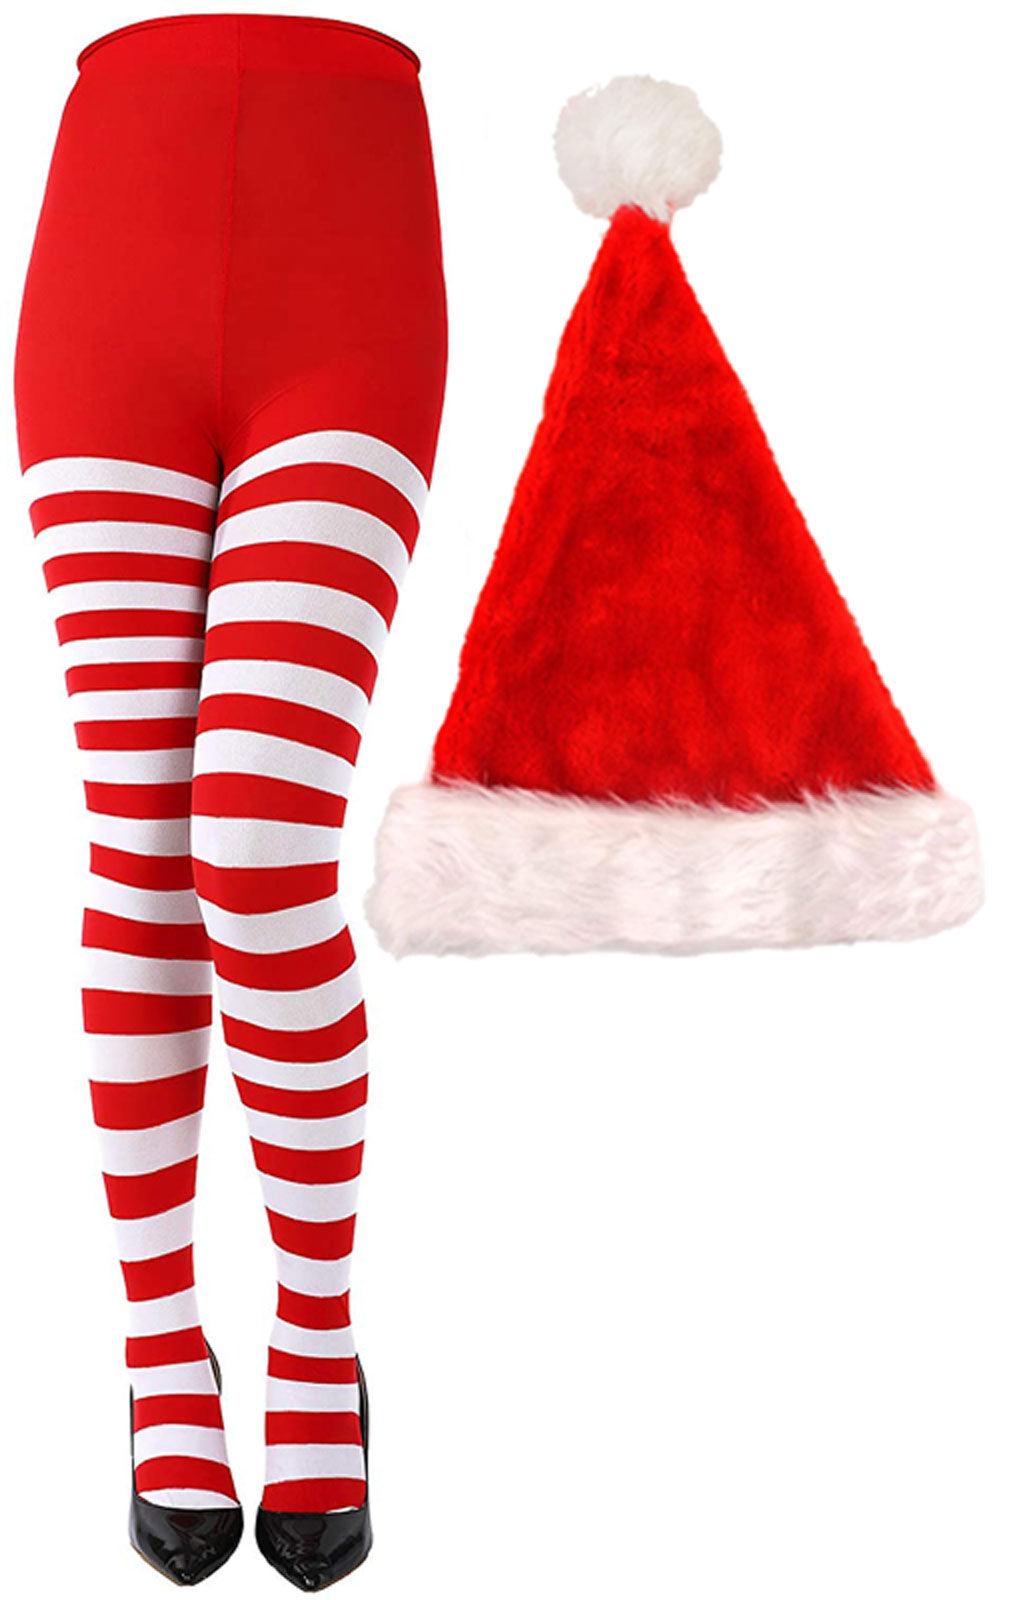 Festive Elegance: Unwrapping Christmas Magic with Red White Stripy Tights and Deluxe Santa Hat Fancy Dress